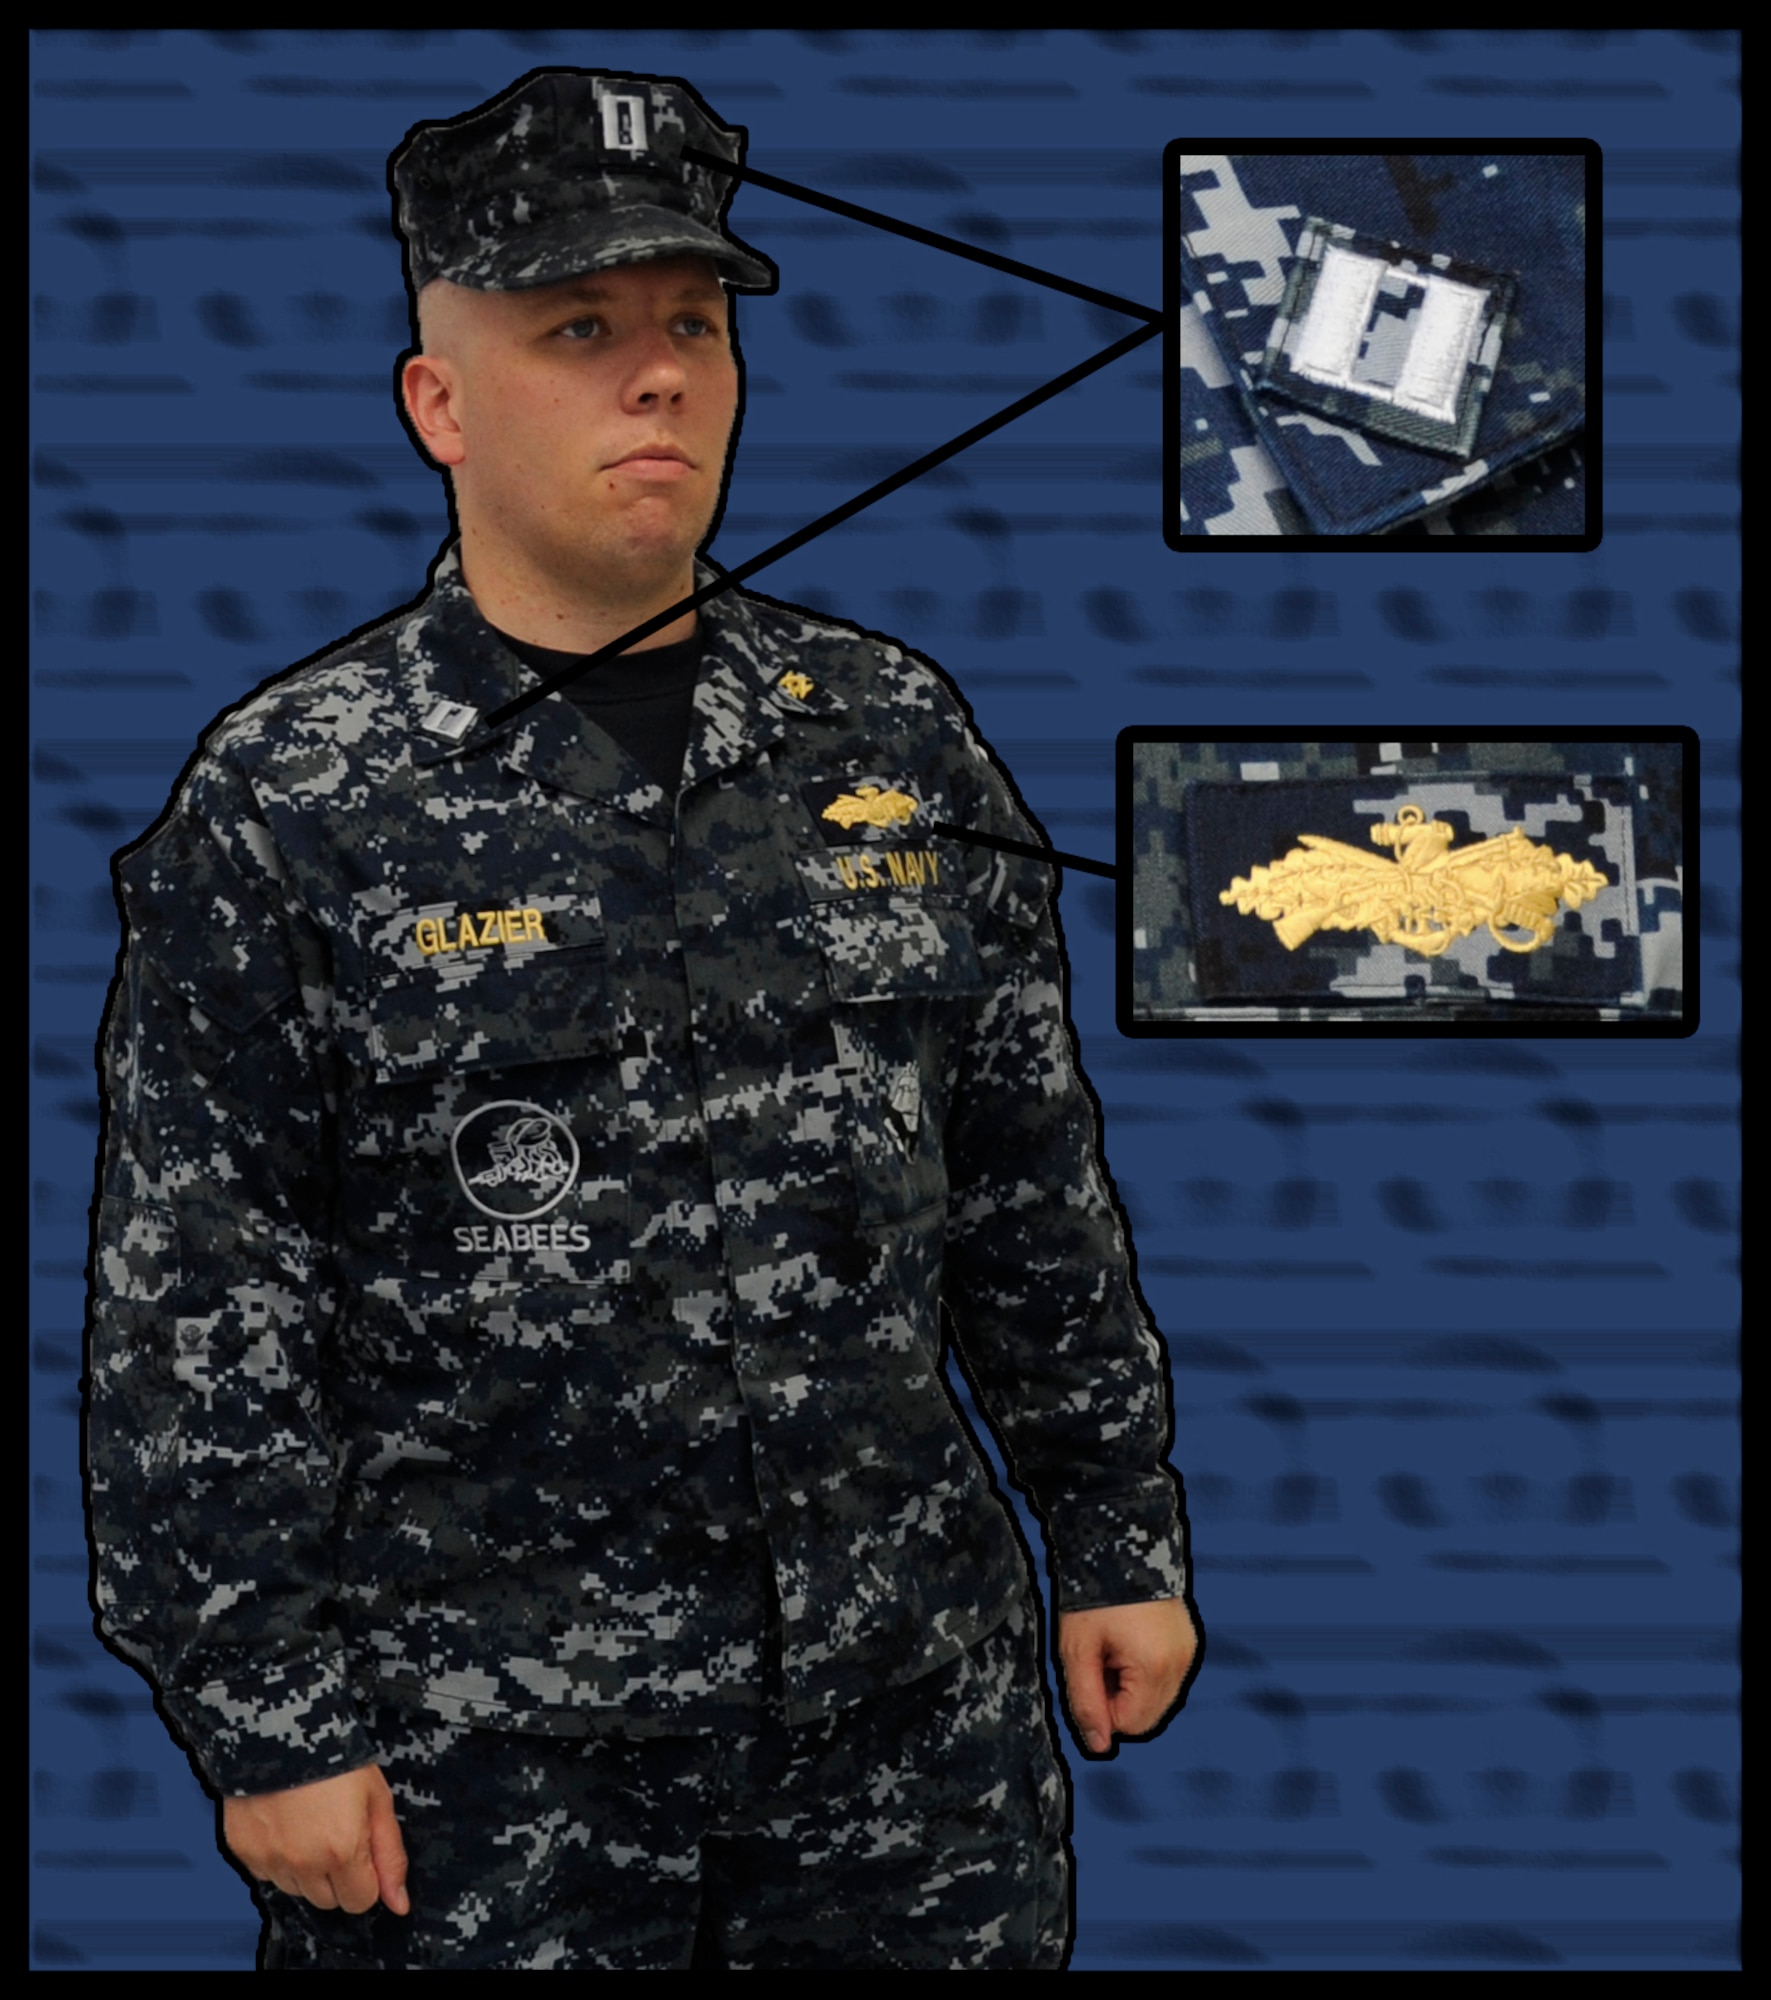 U.S. Navy Lt. Dustin Glazier, Naval Air Facility Misawa public works officer, displays a Navy Working Uniform Type 1 at Misawa Air Base, Japan, June 28, 2012. Naval officers have gold warfare designators and enlisted personnel have silver. The insignia for NWU's are located on the front of the cap and the collar. (U.S. Air Force graphic by Airman 1st Class Kaleb Snay/ Released)